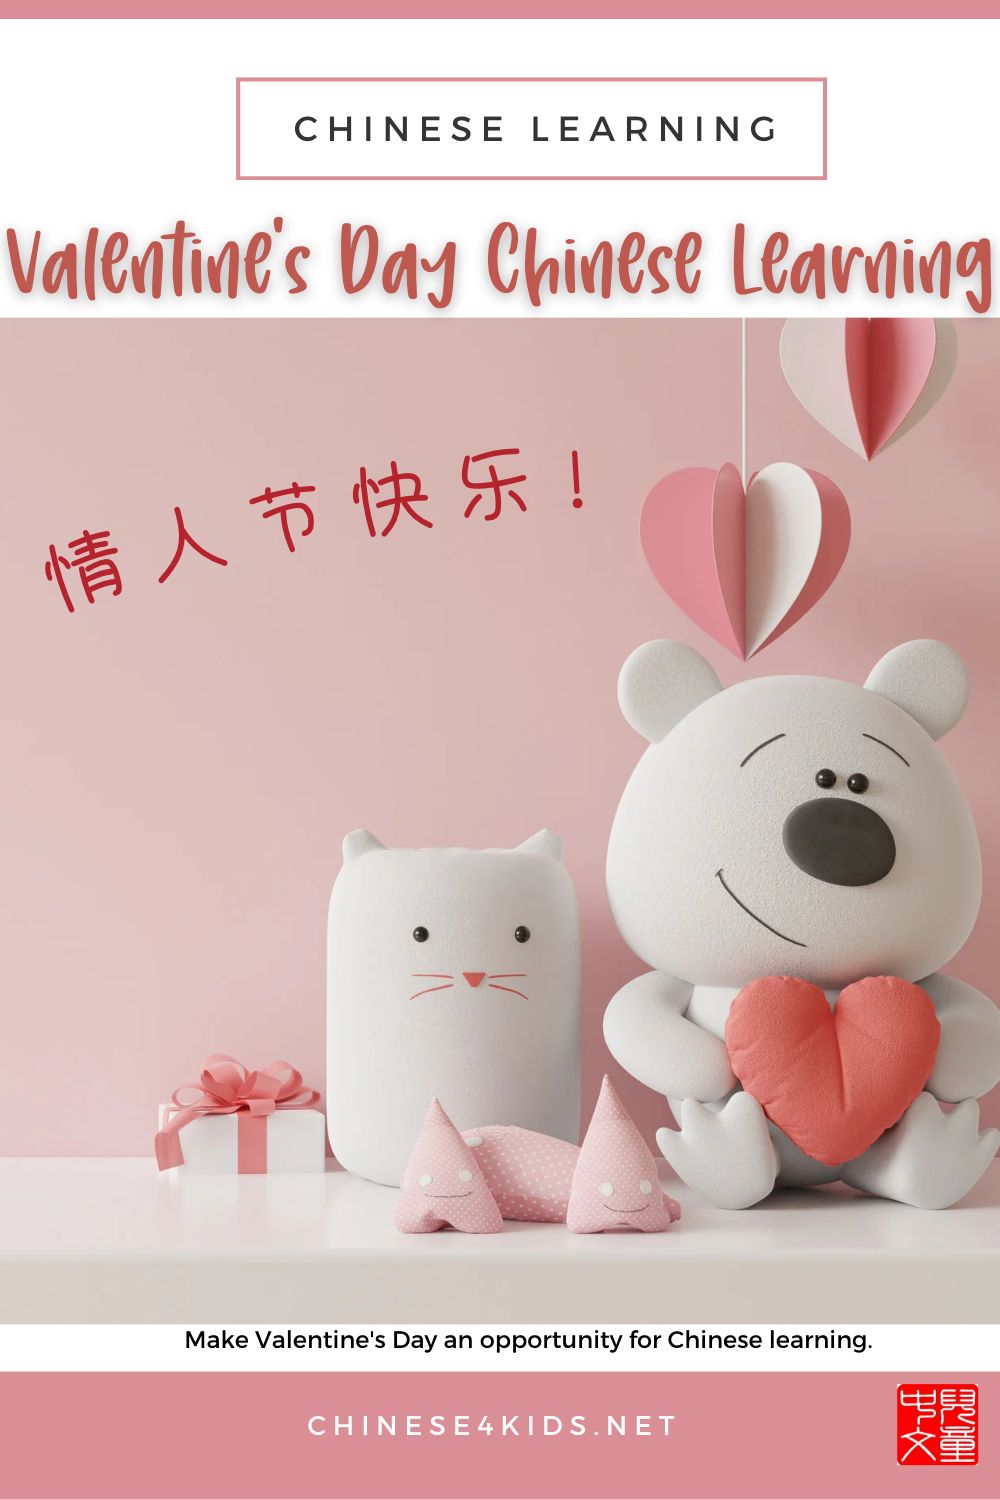 Valentines Day Chinese Learning - Learn Chinese around Valentine's Day with kids #Chinese4kids #learnChinese #Valentinesday #ValentinesdayinChinese